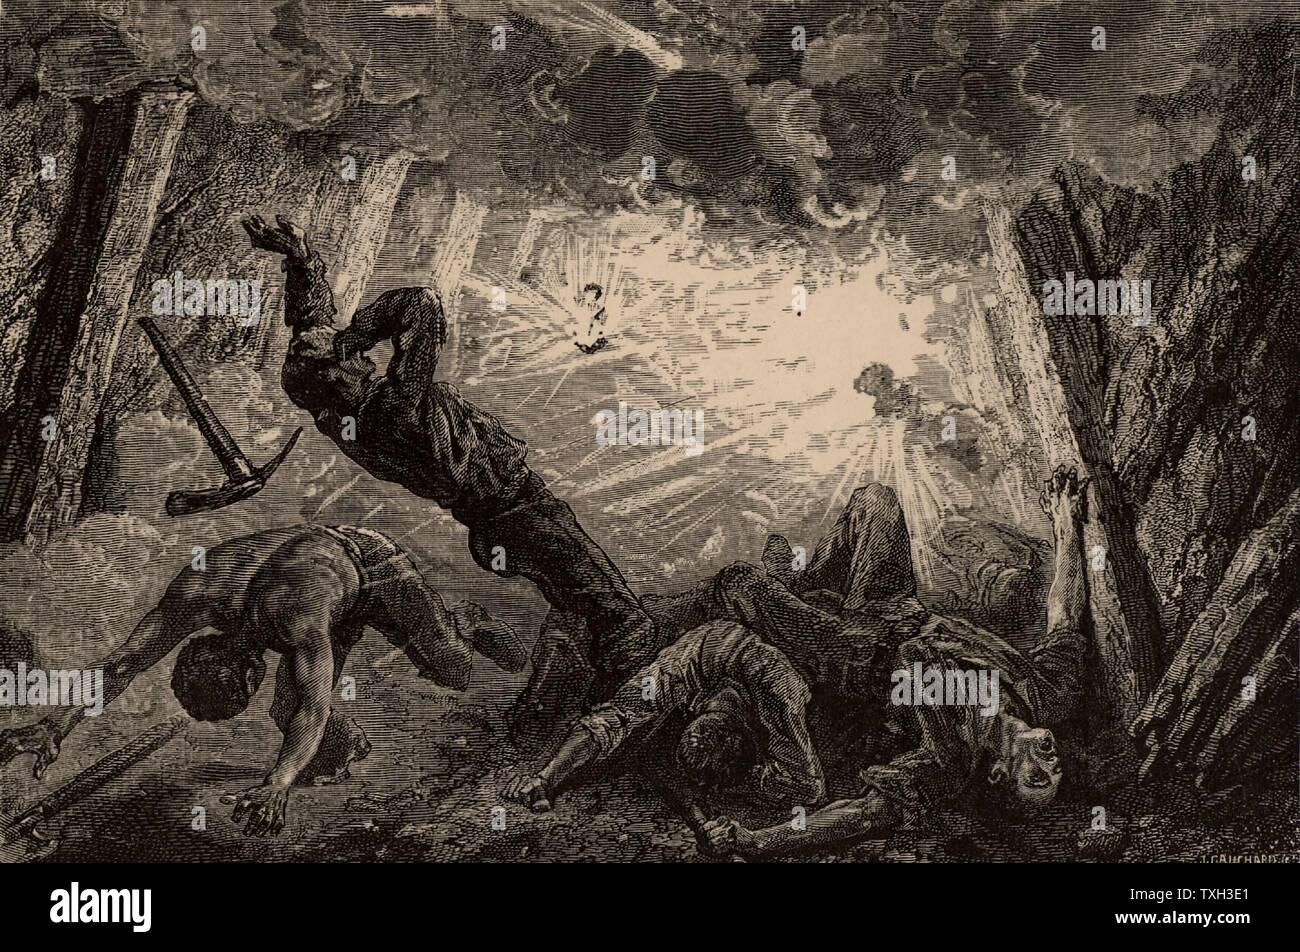 Explosion of Fire-damp (methane) in a mine.   From  'Underground Life; or, Mines and Miners' by Louis Simonin (London, 1869). Wood engraving.  Mining. Coal. Stock Photo